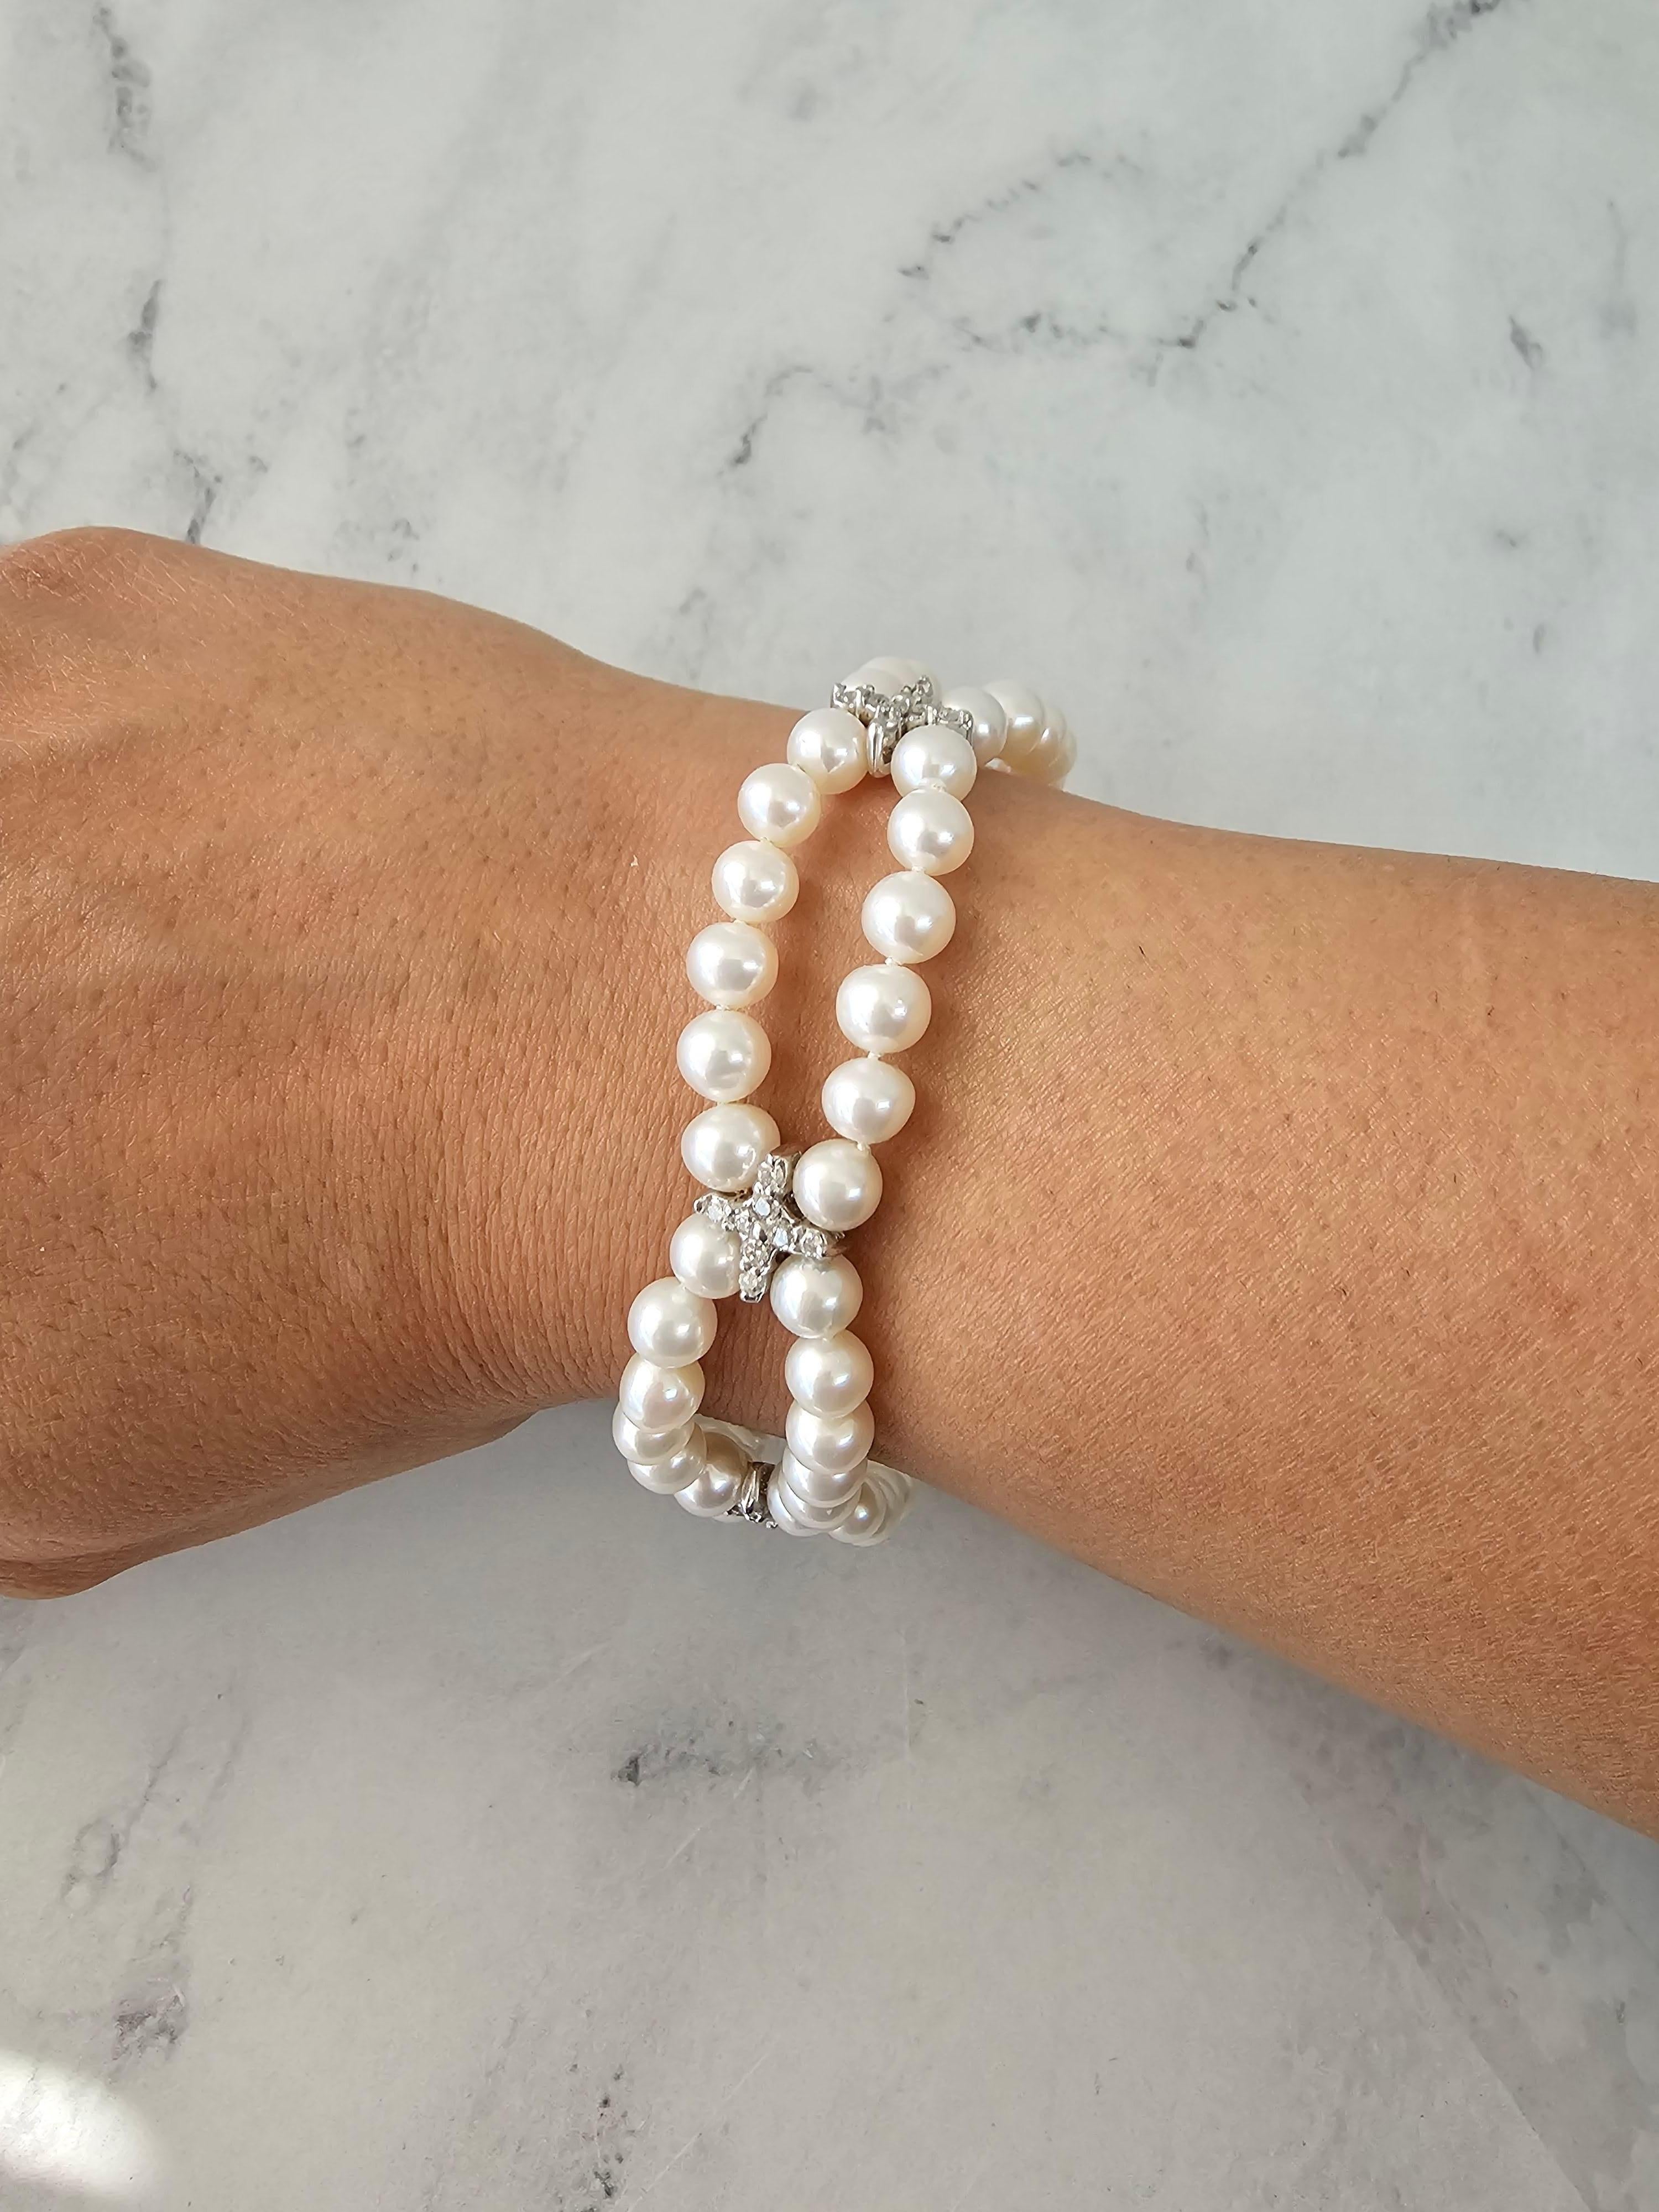 ♥ Tennis Bracelet Description ♥

Main Stone: Pearl & Diamonds
Approx. Carat Weight: .72cttw
Diamond Color: G/H
Diamond Clarity: SI1/SI2
Pearl Size: 6MM
Metal Weight:  10 grams
Metal: 14k White Gold
Bracelet Length: 7 Inches
Weight: 20 grams